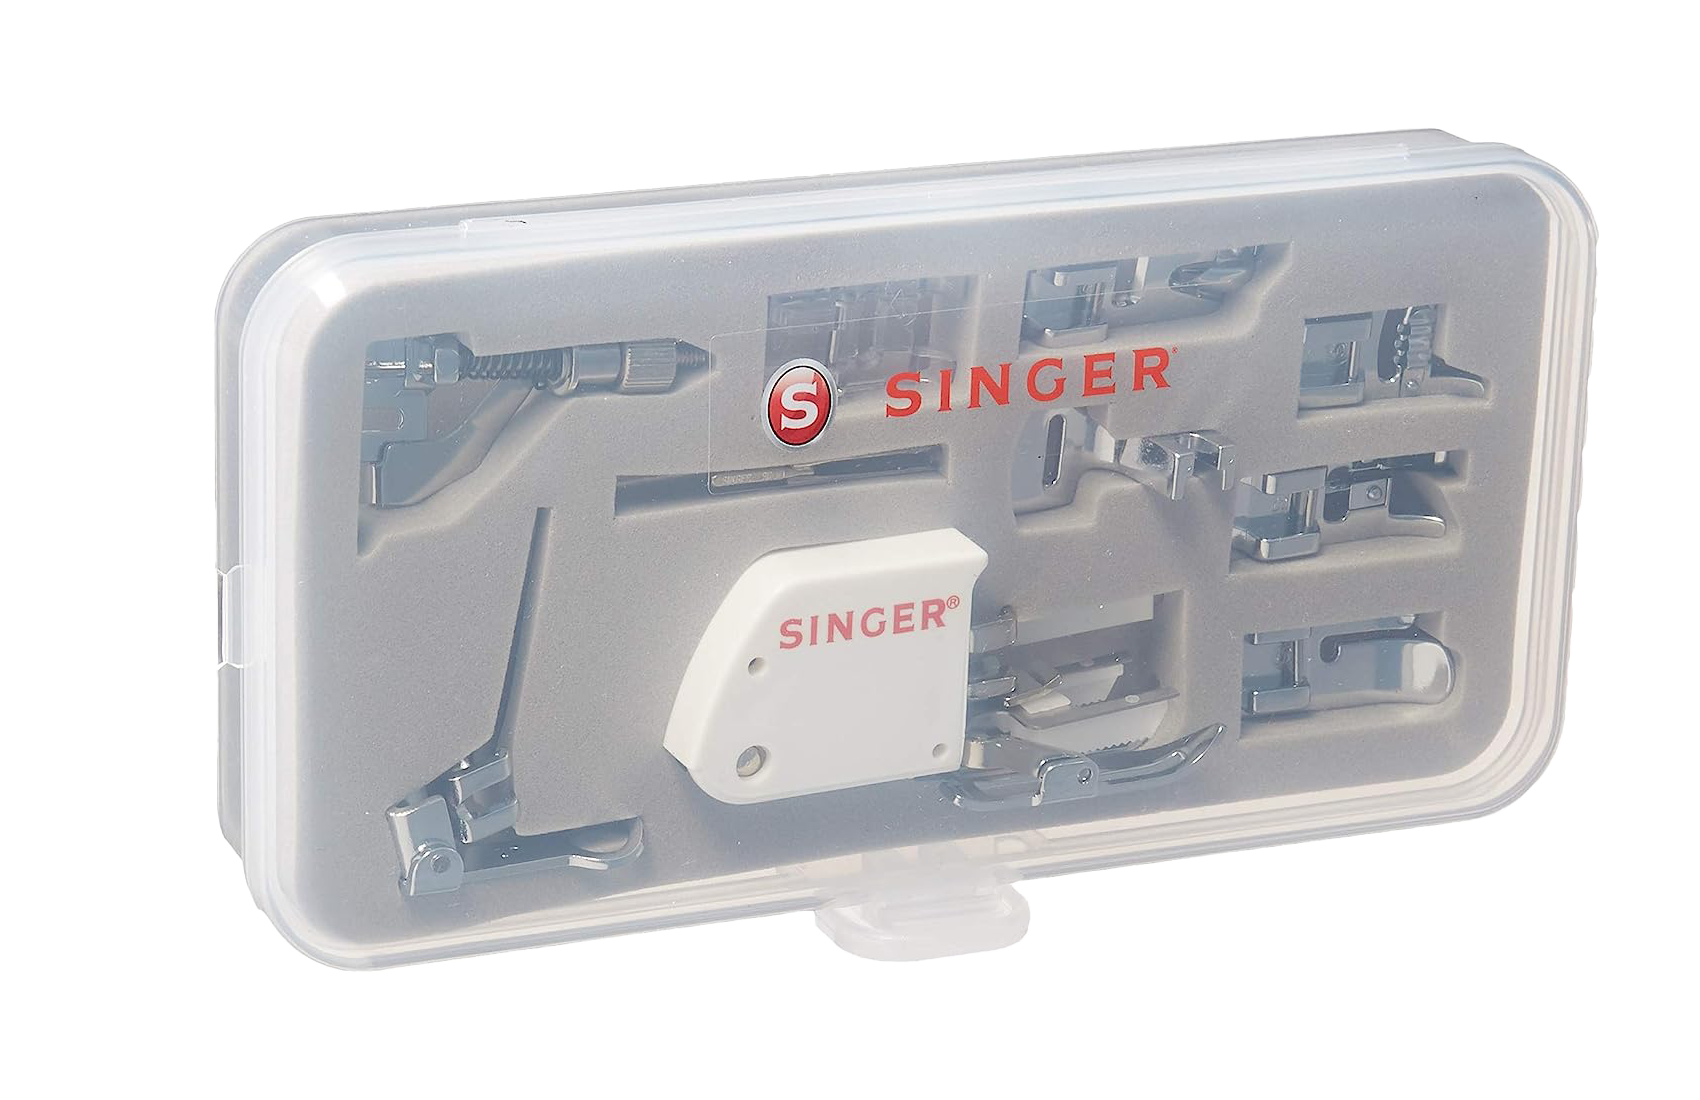  SINGER  M2100 Sewing Machine With Accessory Kit